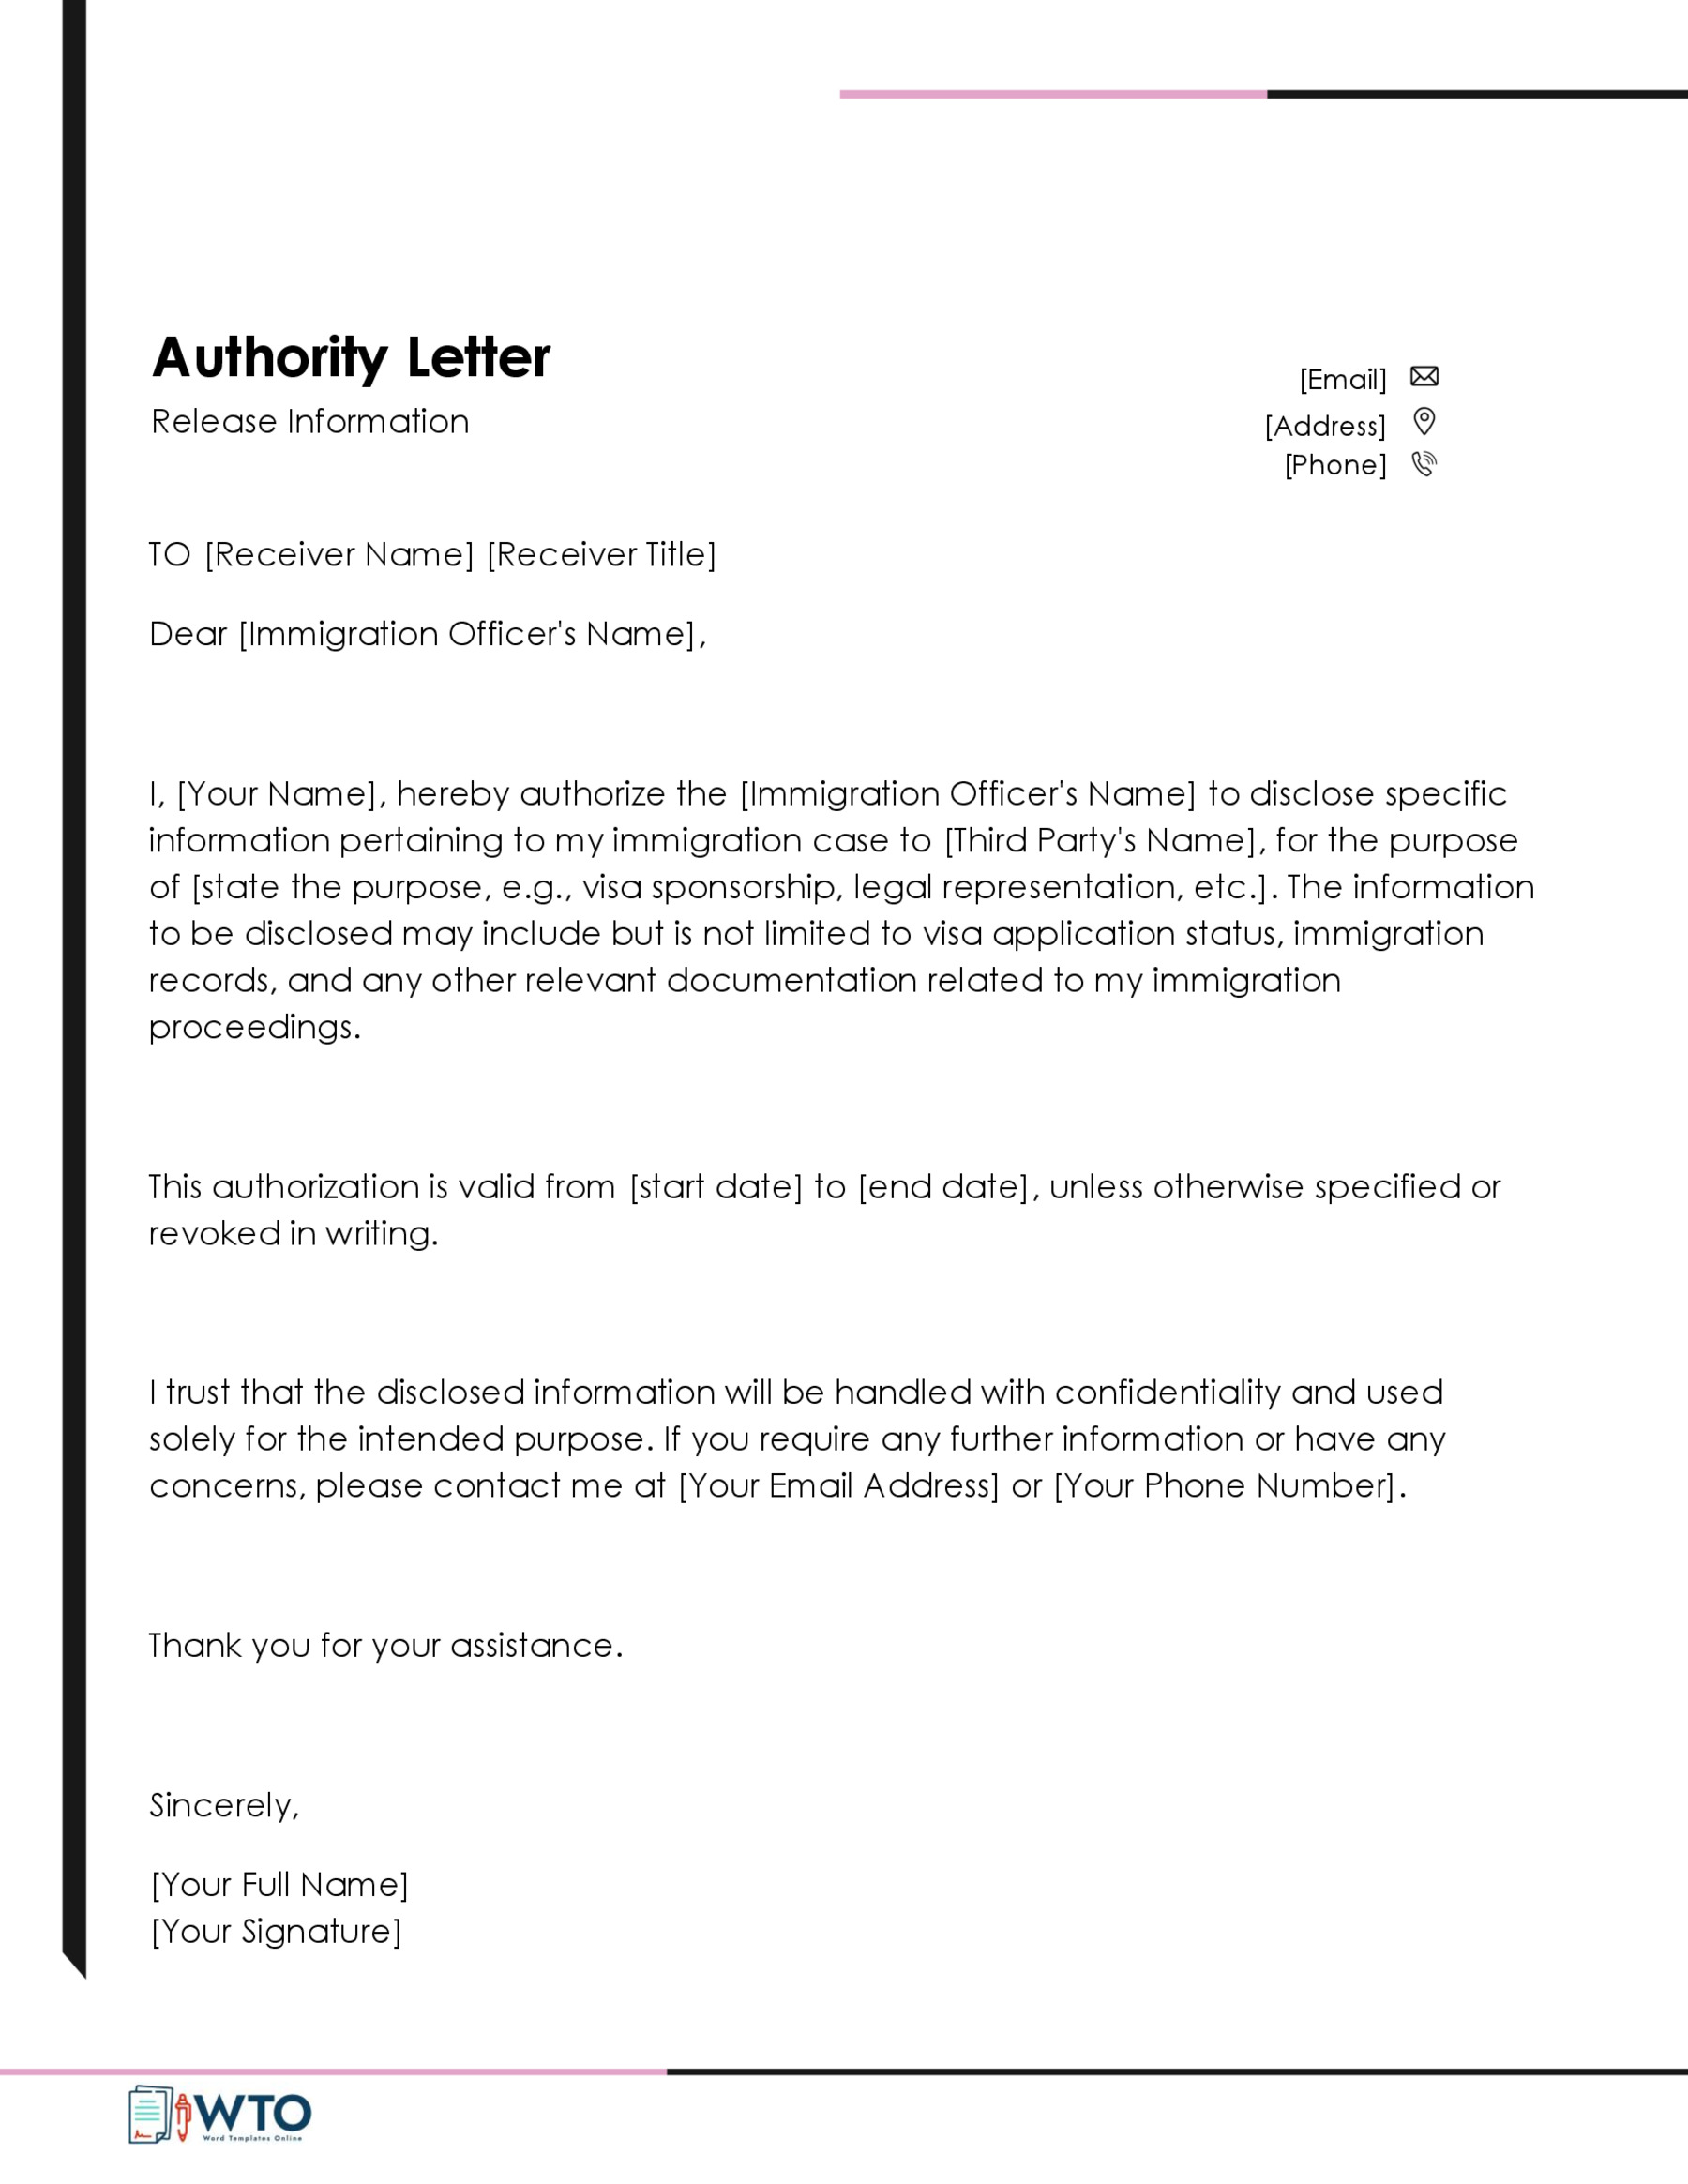 Authorization Letter to Release Information Template-Ms Word Free Download